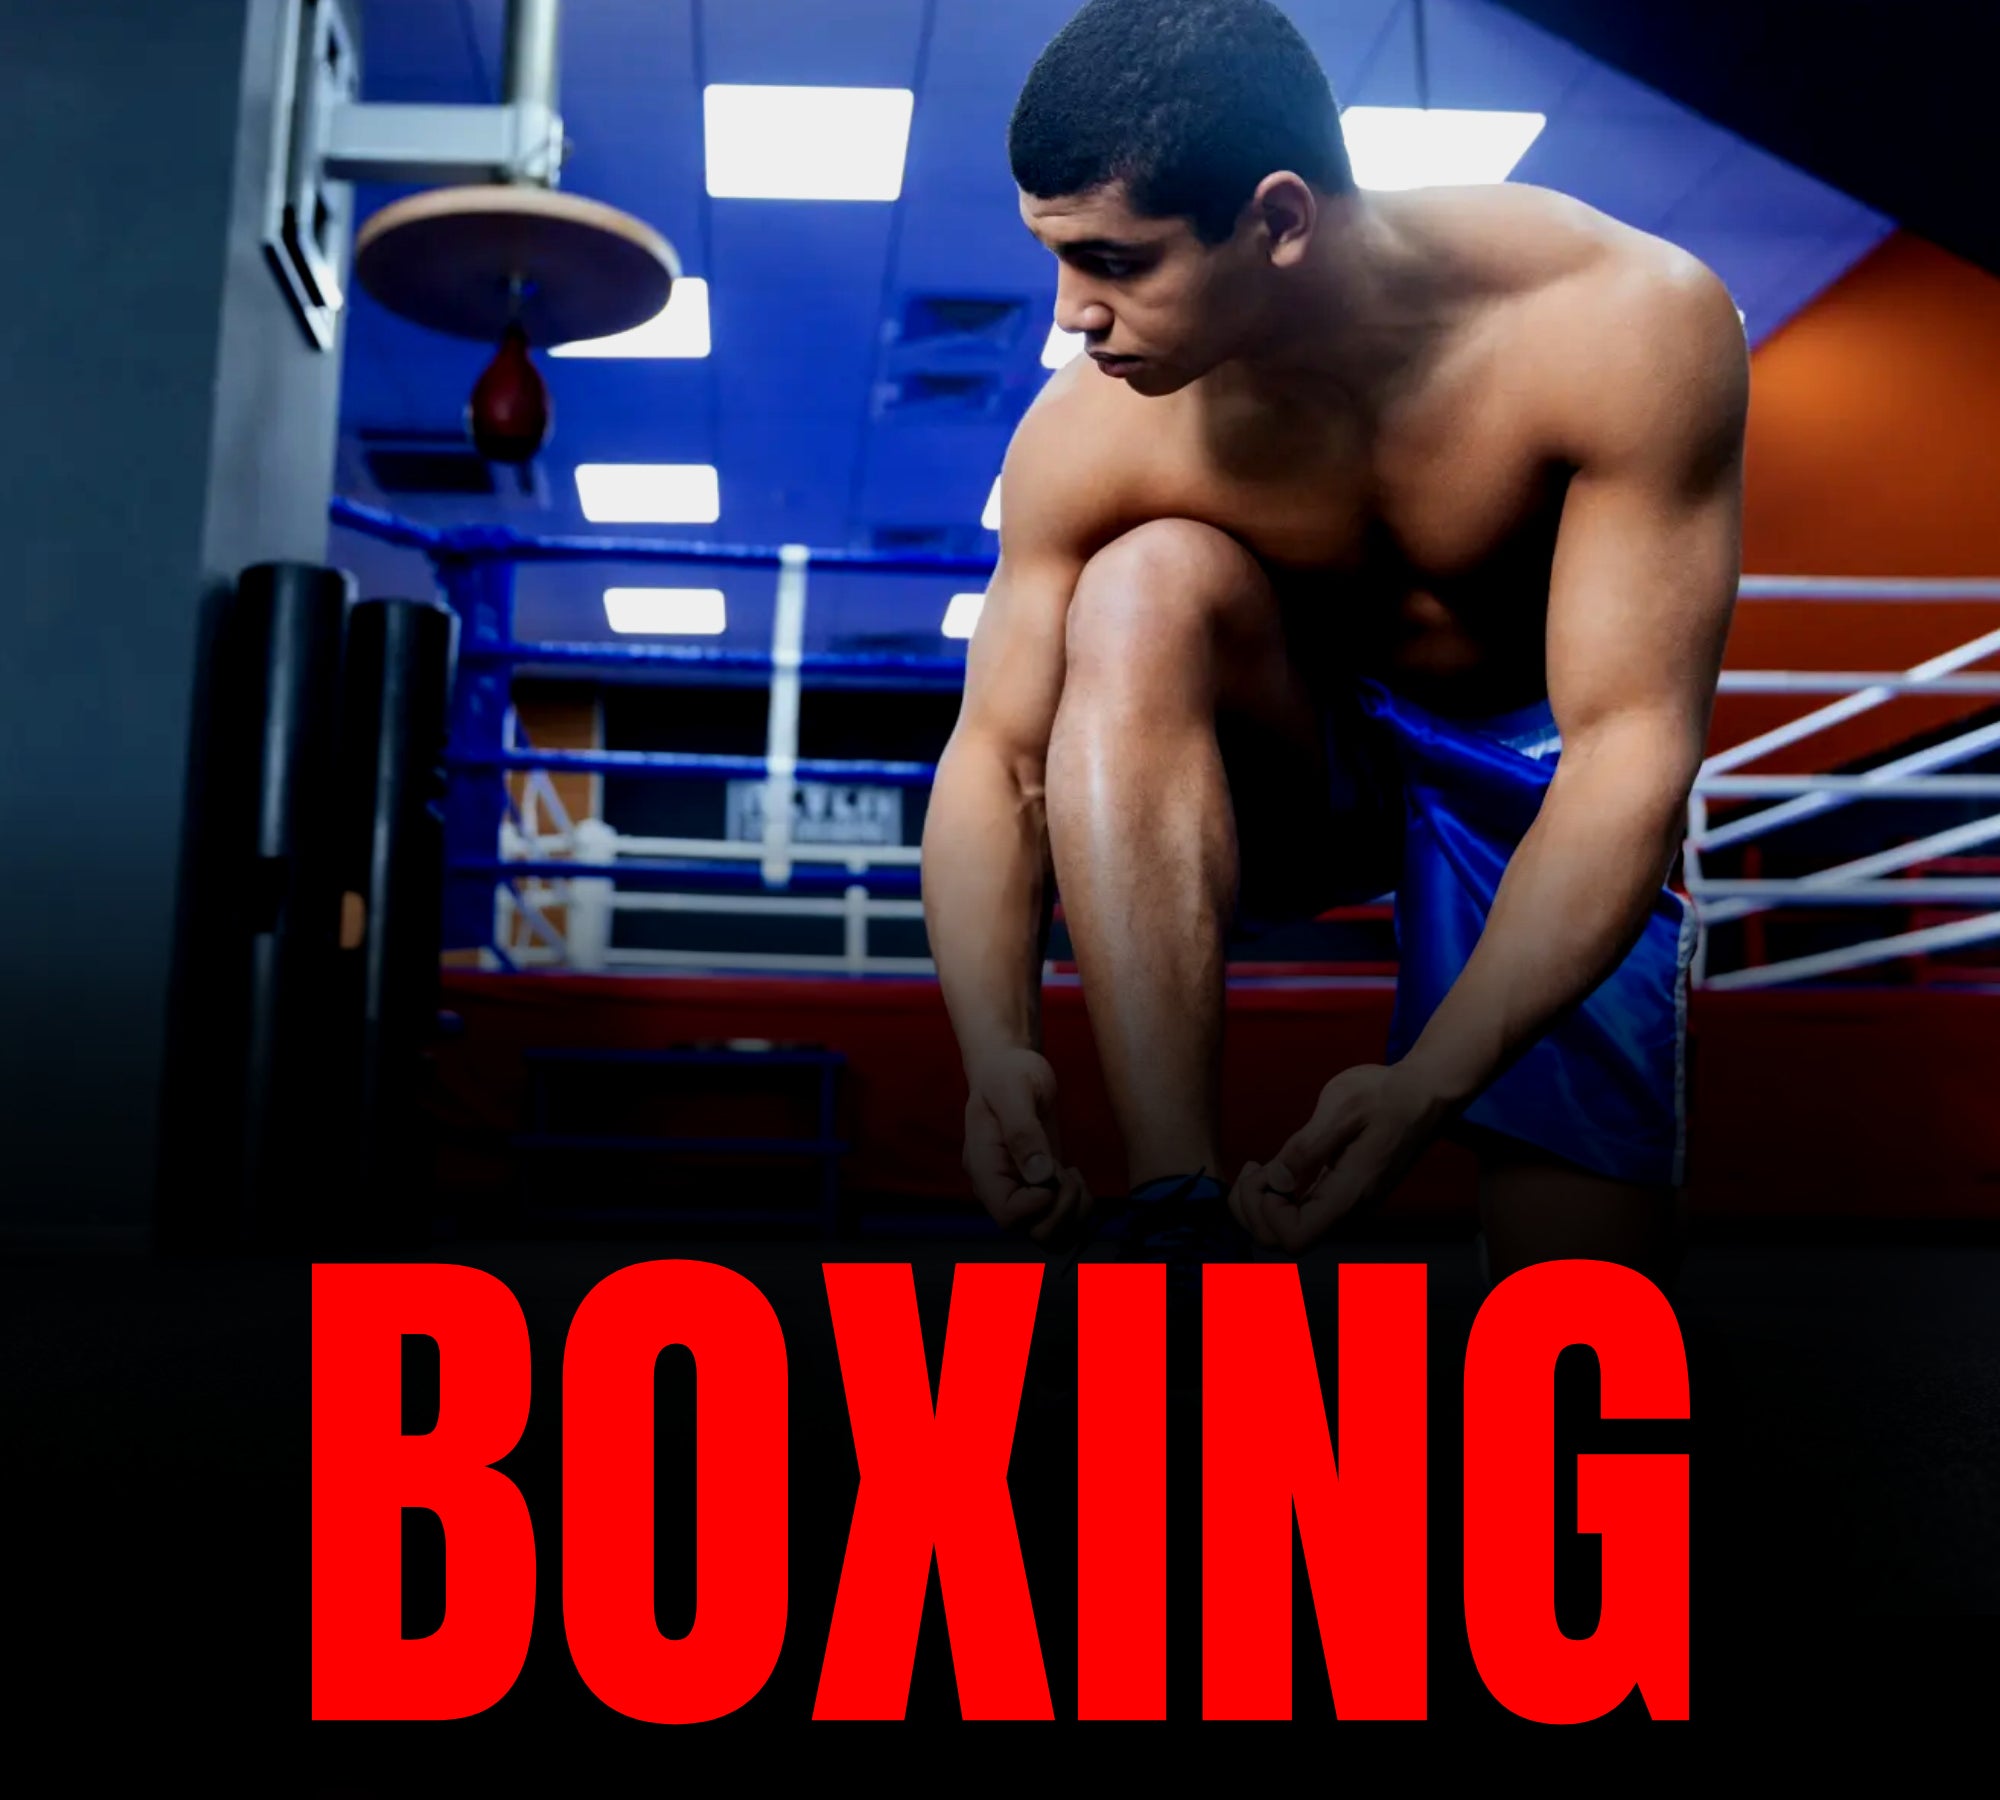 BOXING CATEGORY